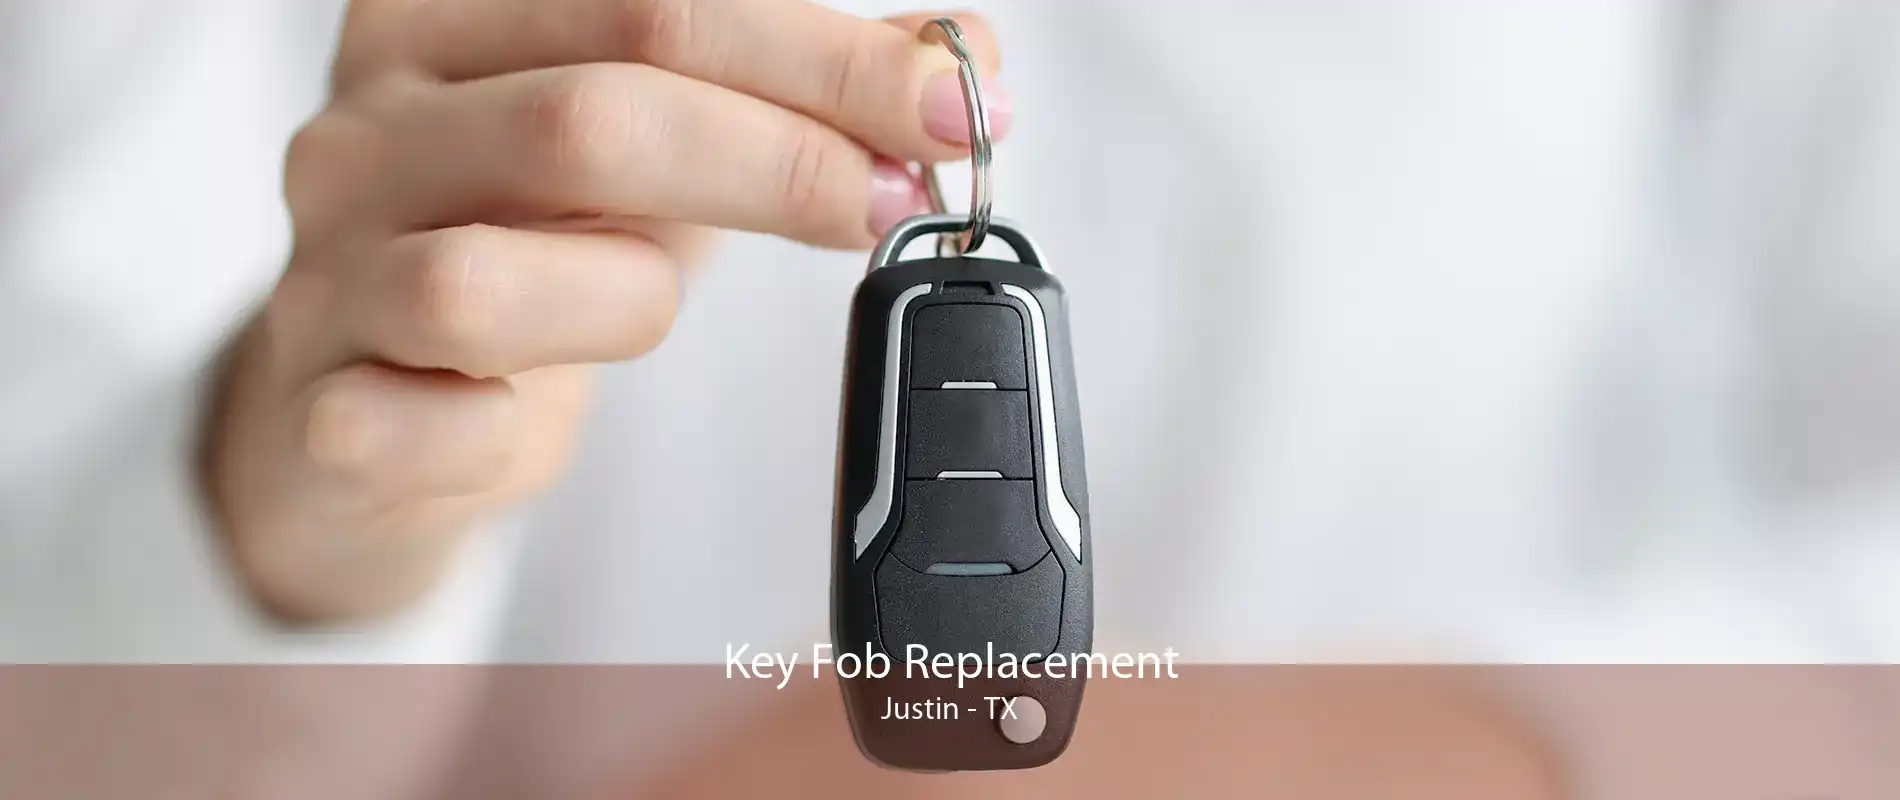 Key Fob Replacement Justin - TX